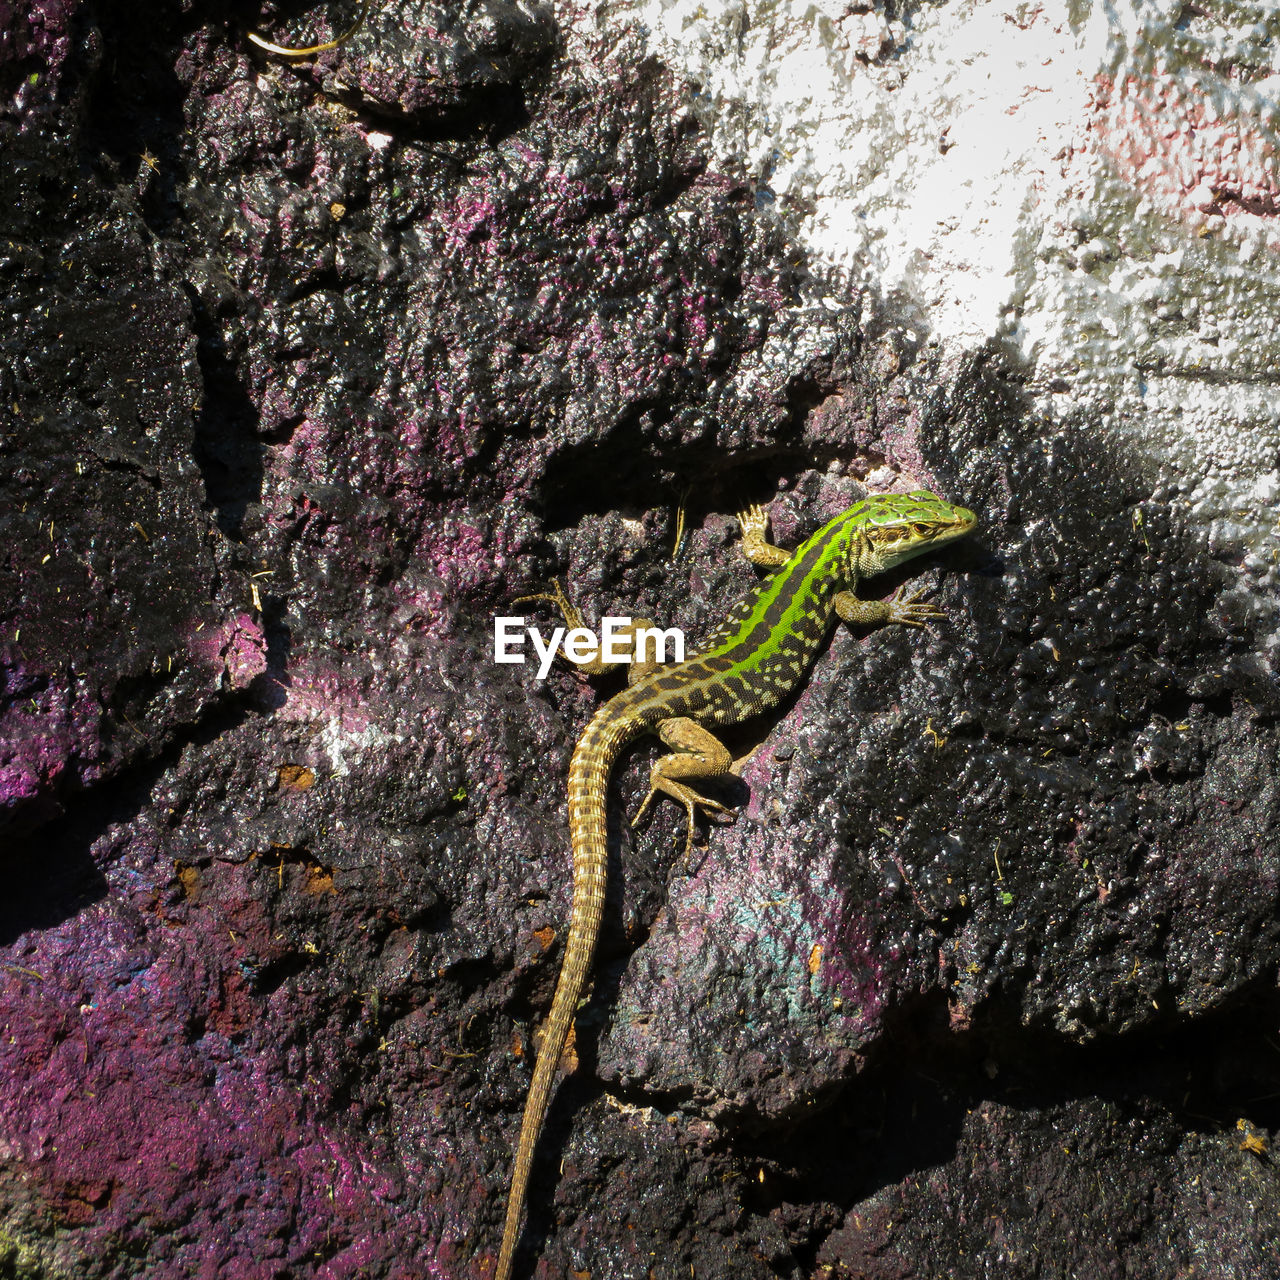 CLOSE-UP OF A REPTILE ON ROCK